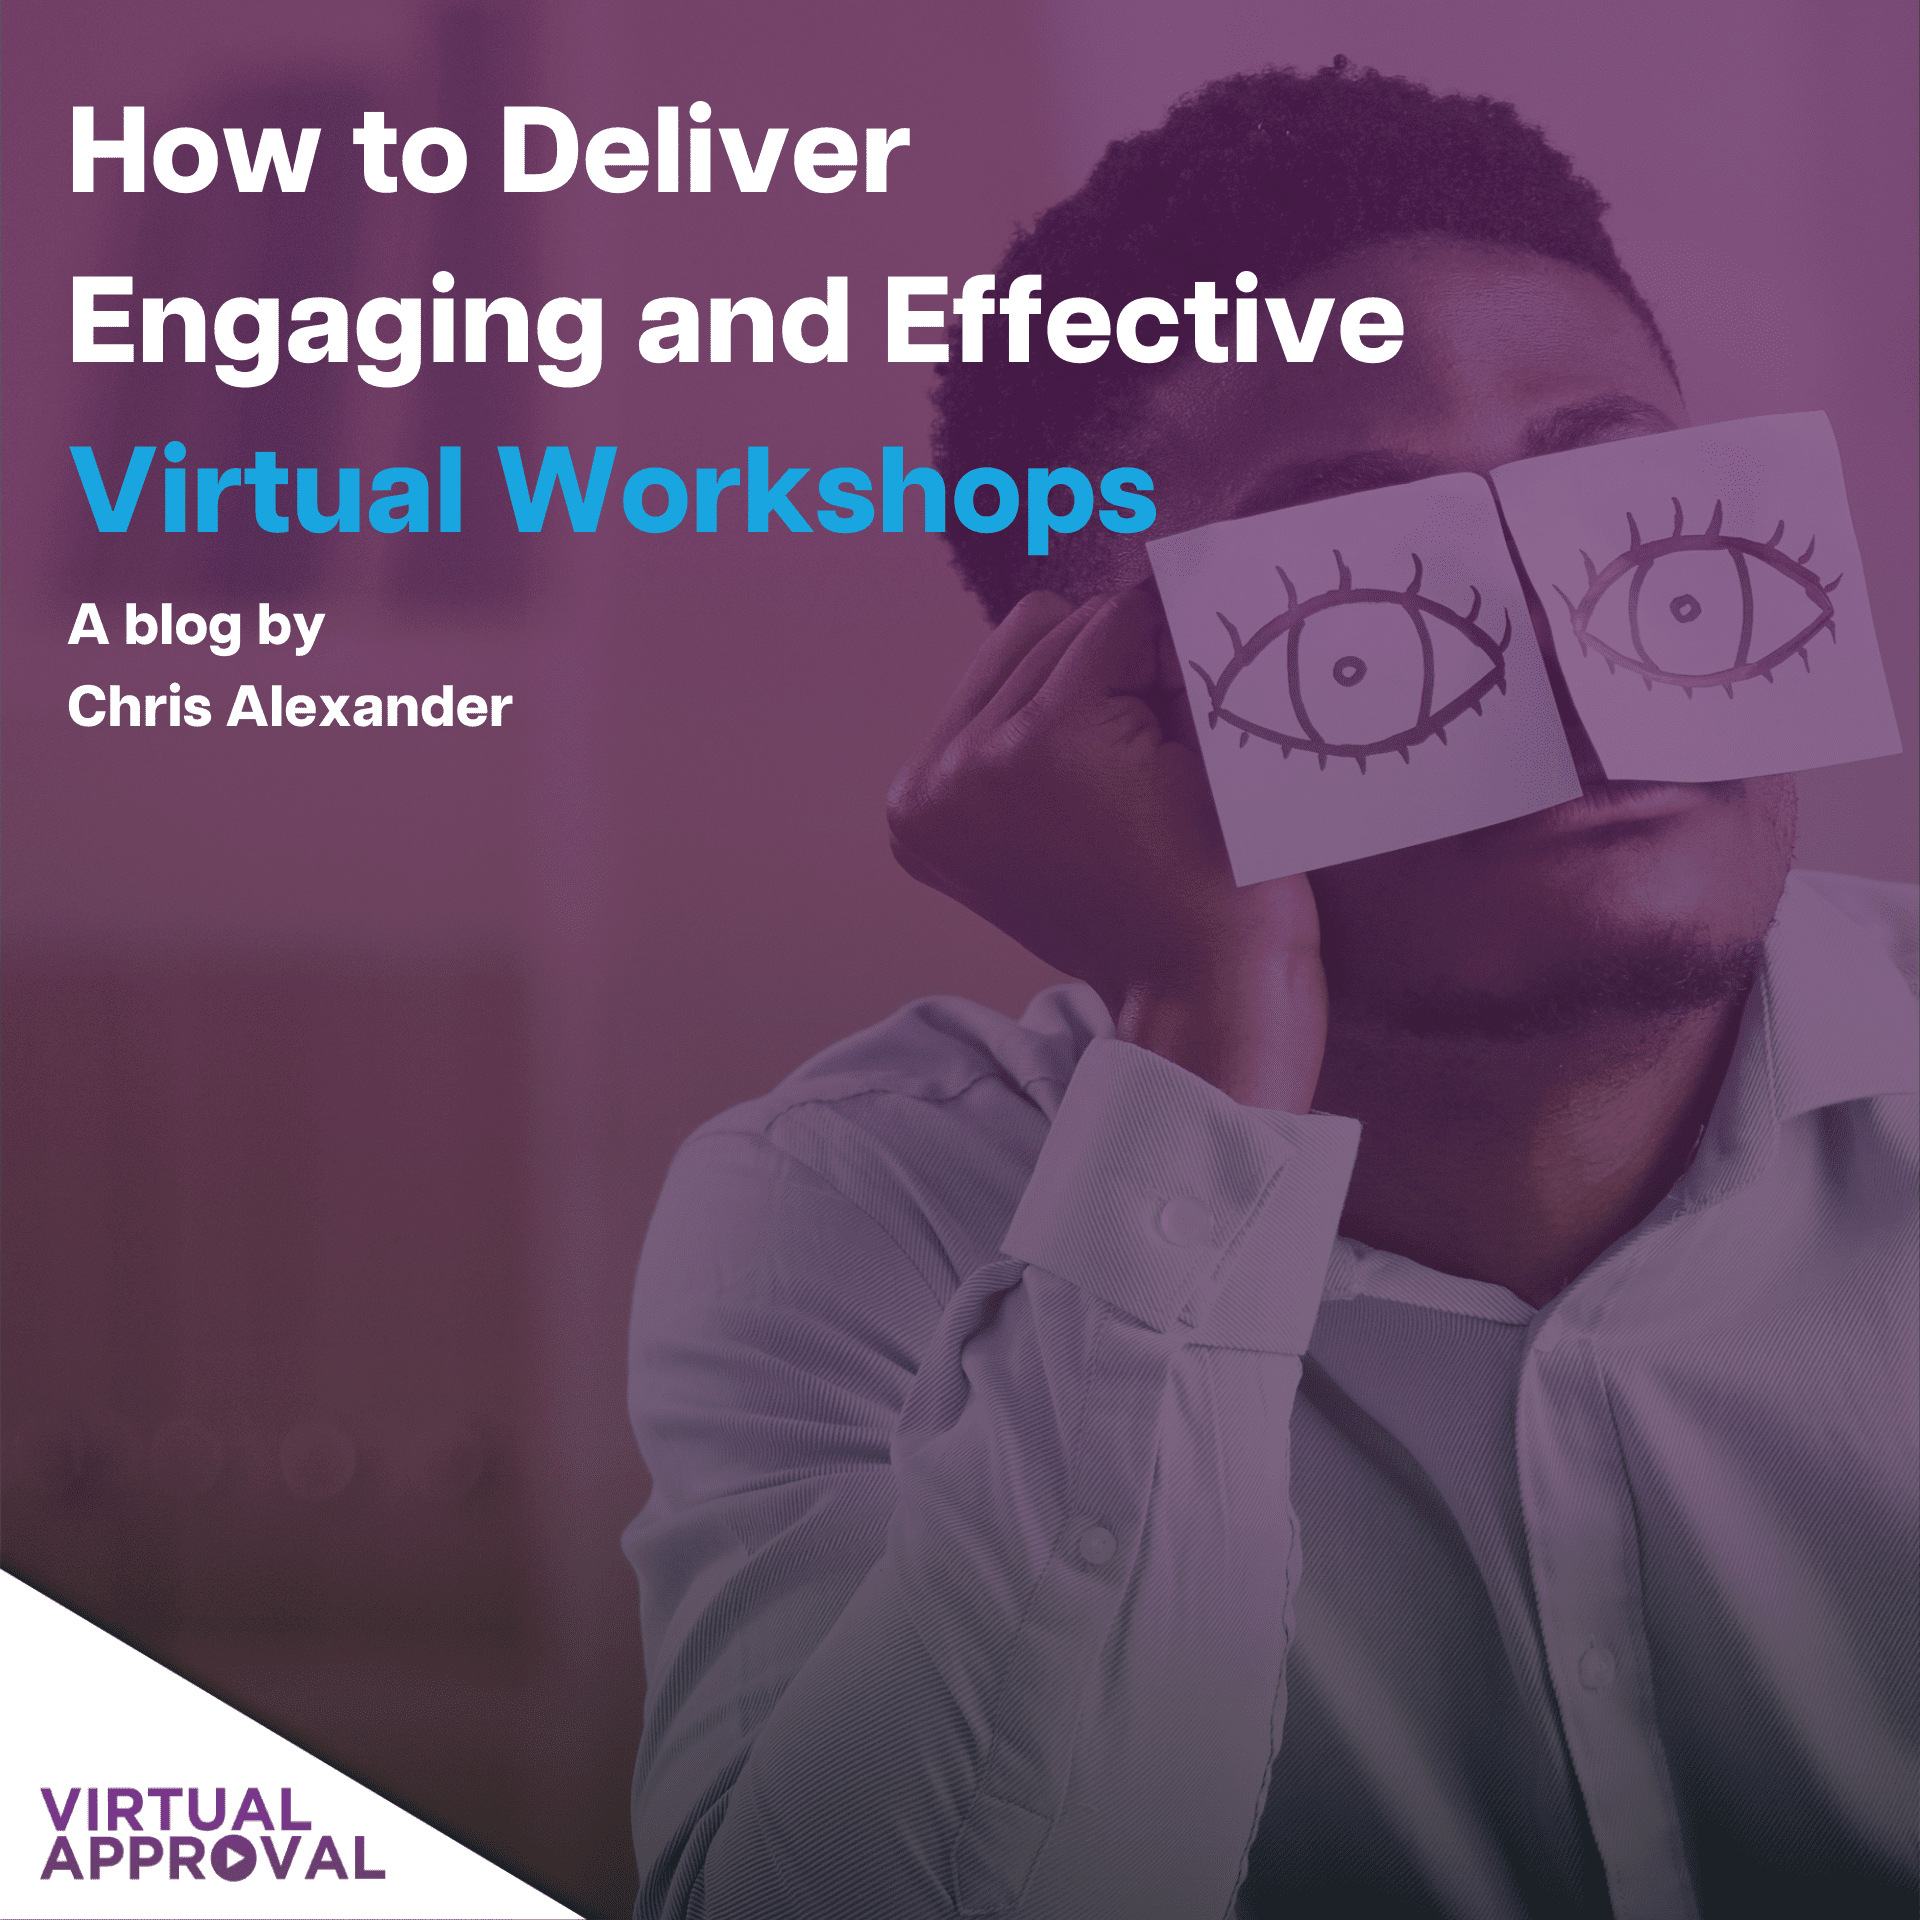 How to Deliver Engaging and Effective Virtual Workshops